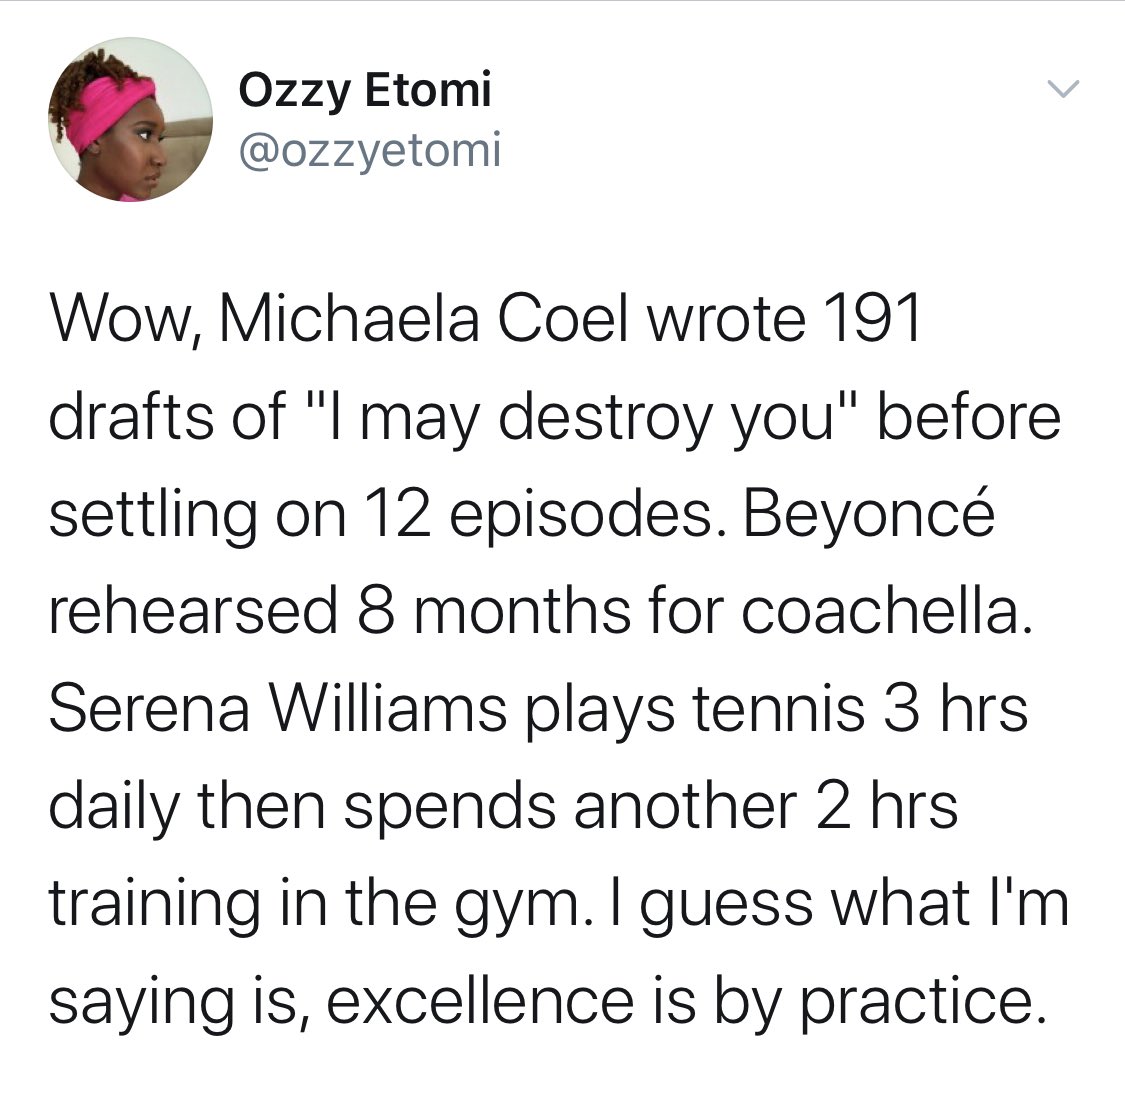 Michaela Coel is the best of us. A genius. And I can’t speak to her process. Perhaps this is what she needs and wants to do. But as a writer, I cringe at conflating what often amounts to overwork due to unclear and relentless interventions from producers, with ‘practice.’